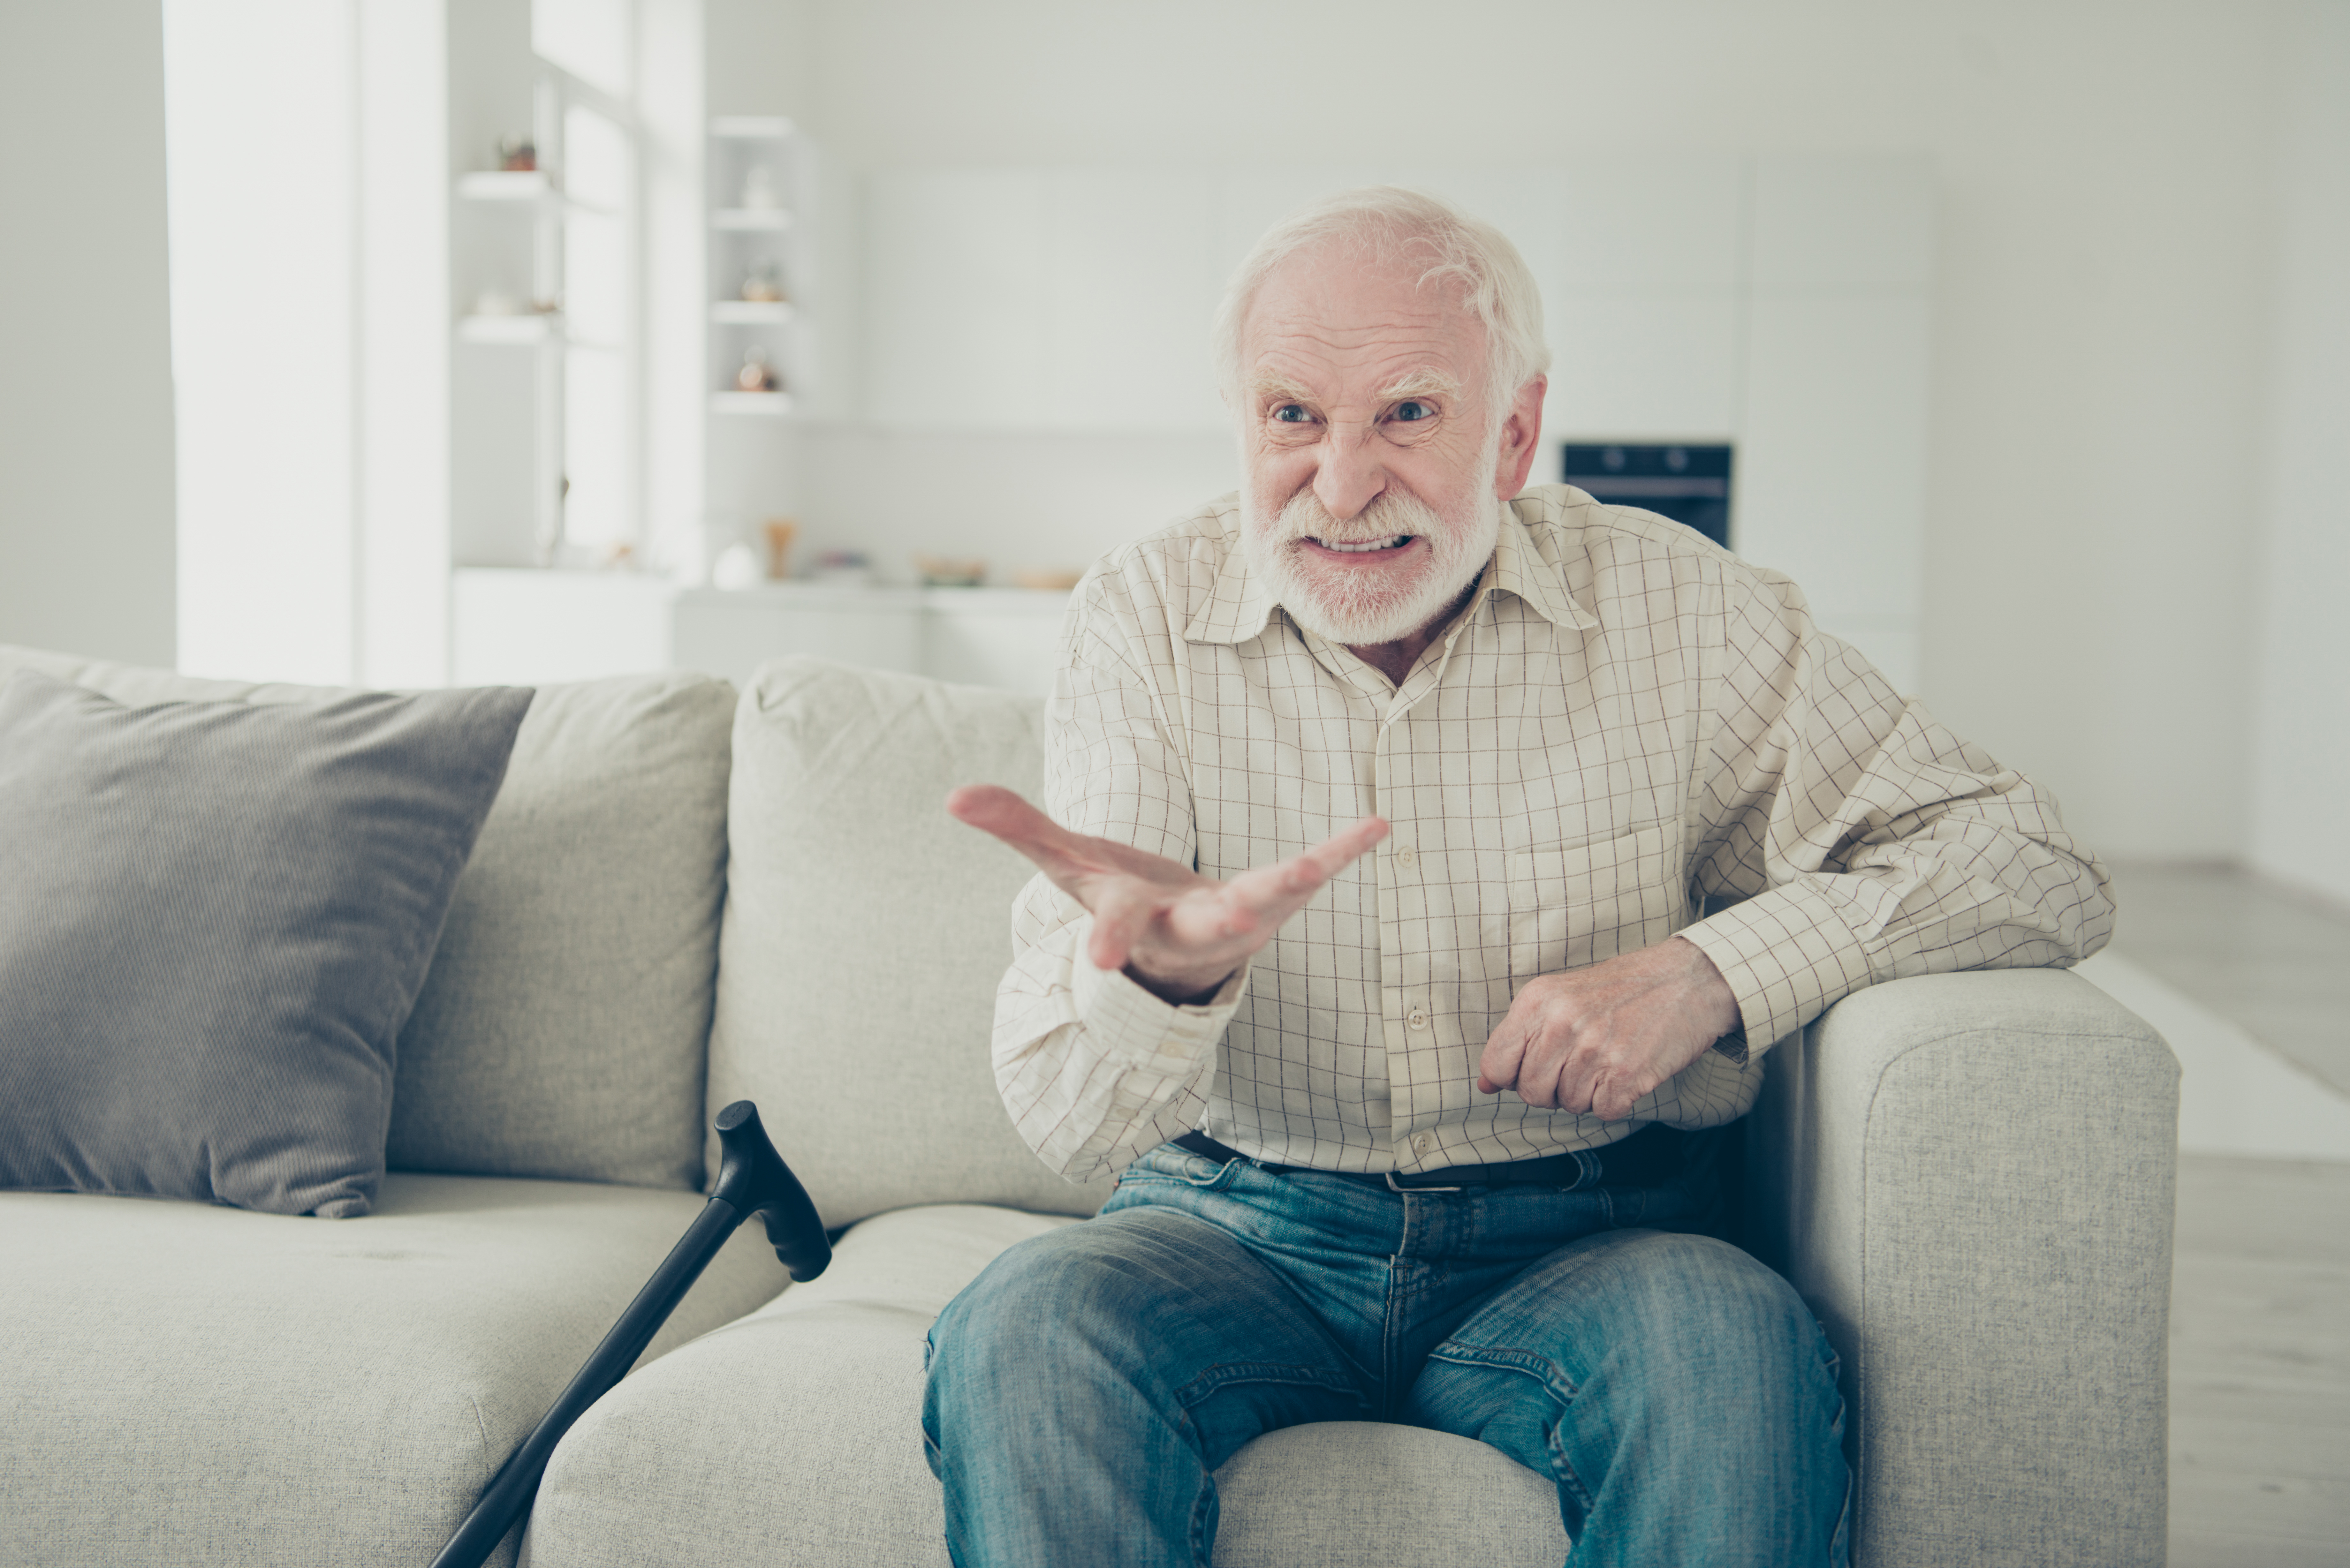 An elderly man arguing with someone not pictured while sitting on the sofa | Source: Shutterstock